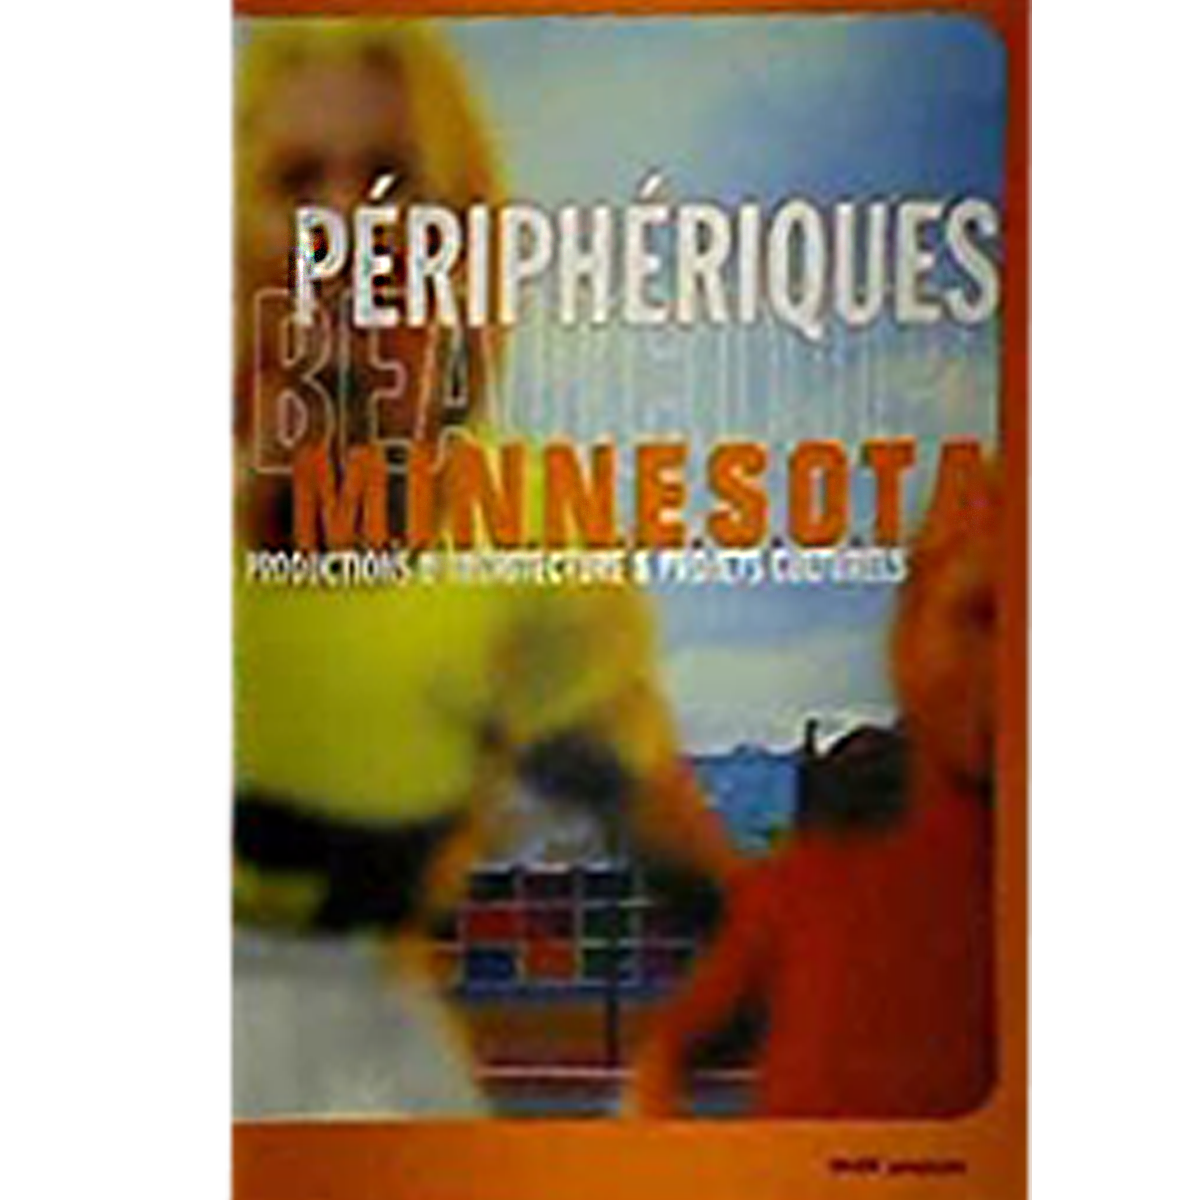 Minnesota: Architectural Works and Cultural Events